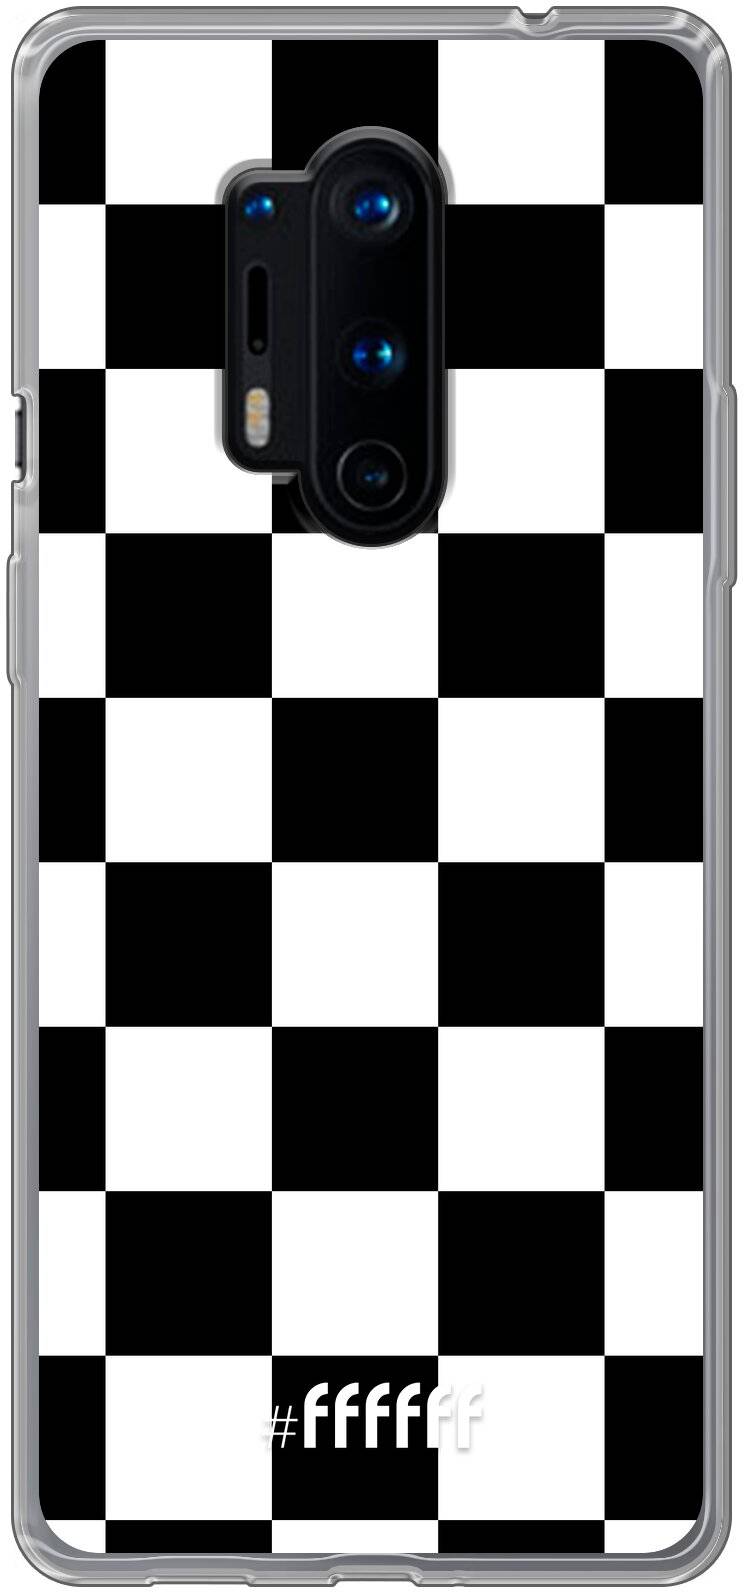 Checkered Chique 8 Pro